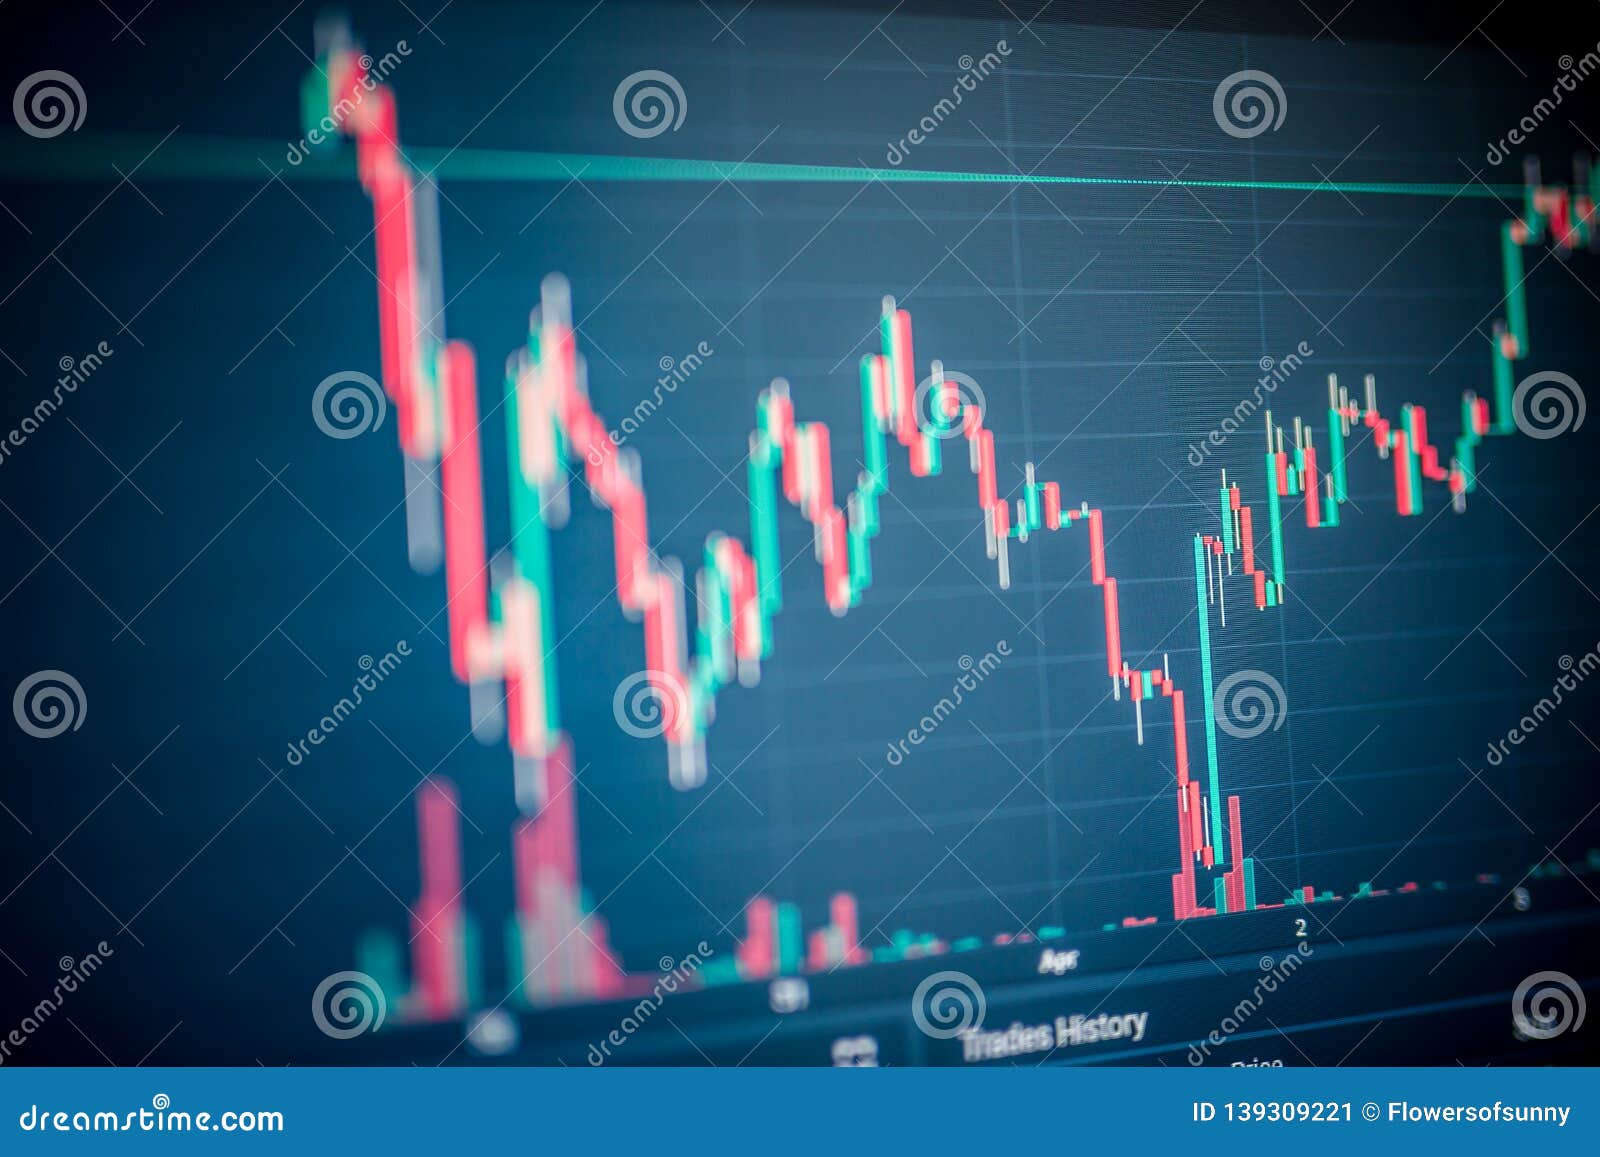 Abstract Background Of Stock Market Graph And Money Movement Sell - 